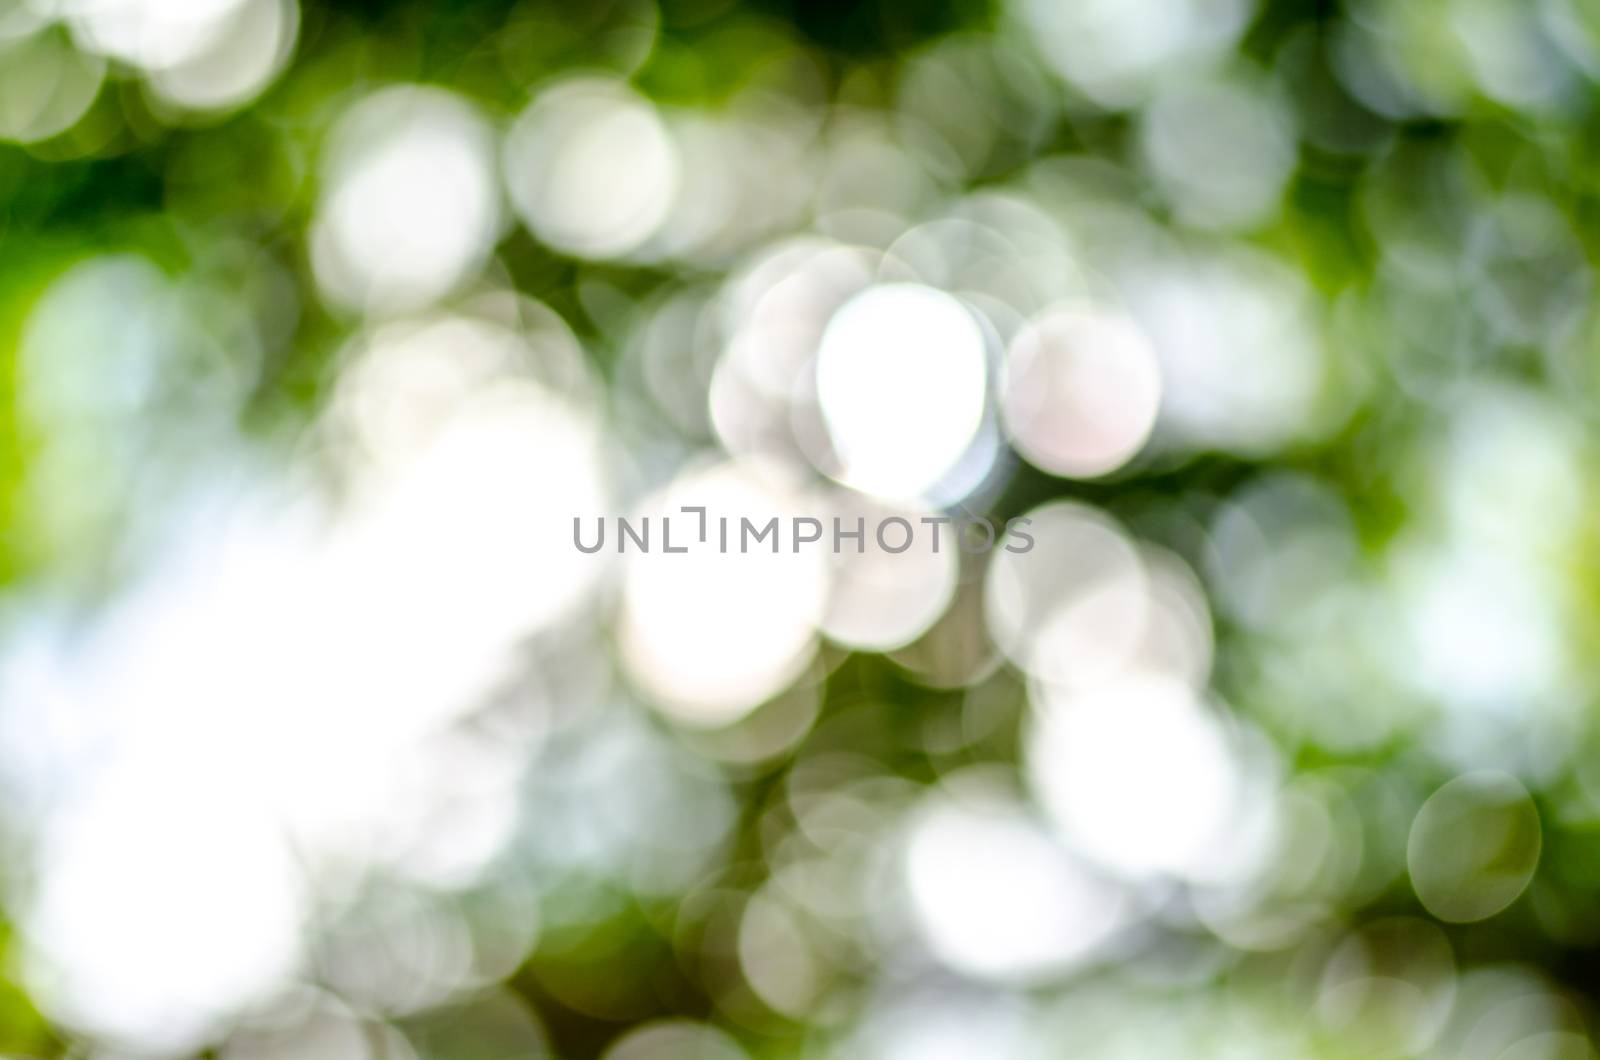 Natural outdoors bokeh in green and yellow tones